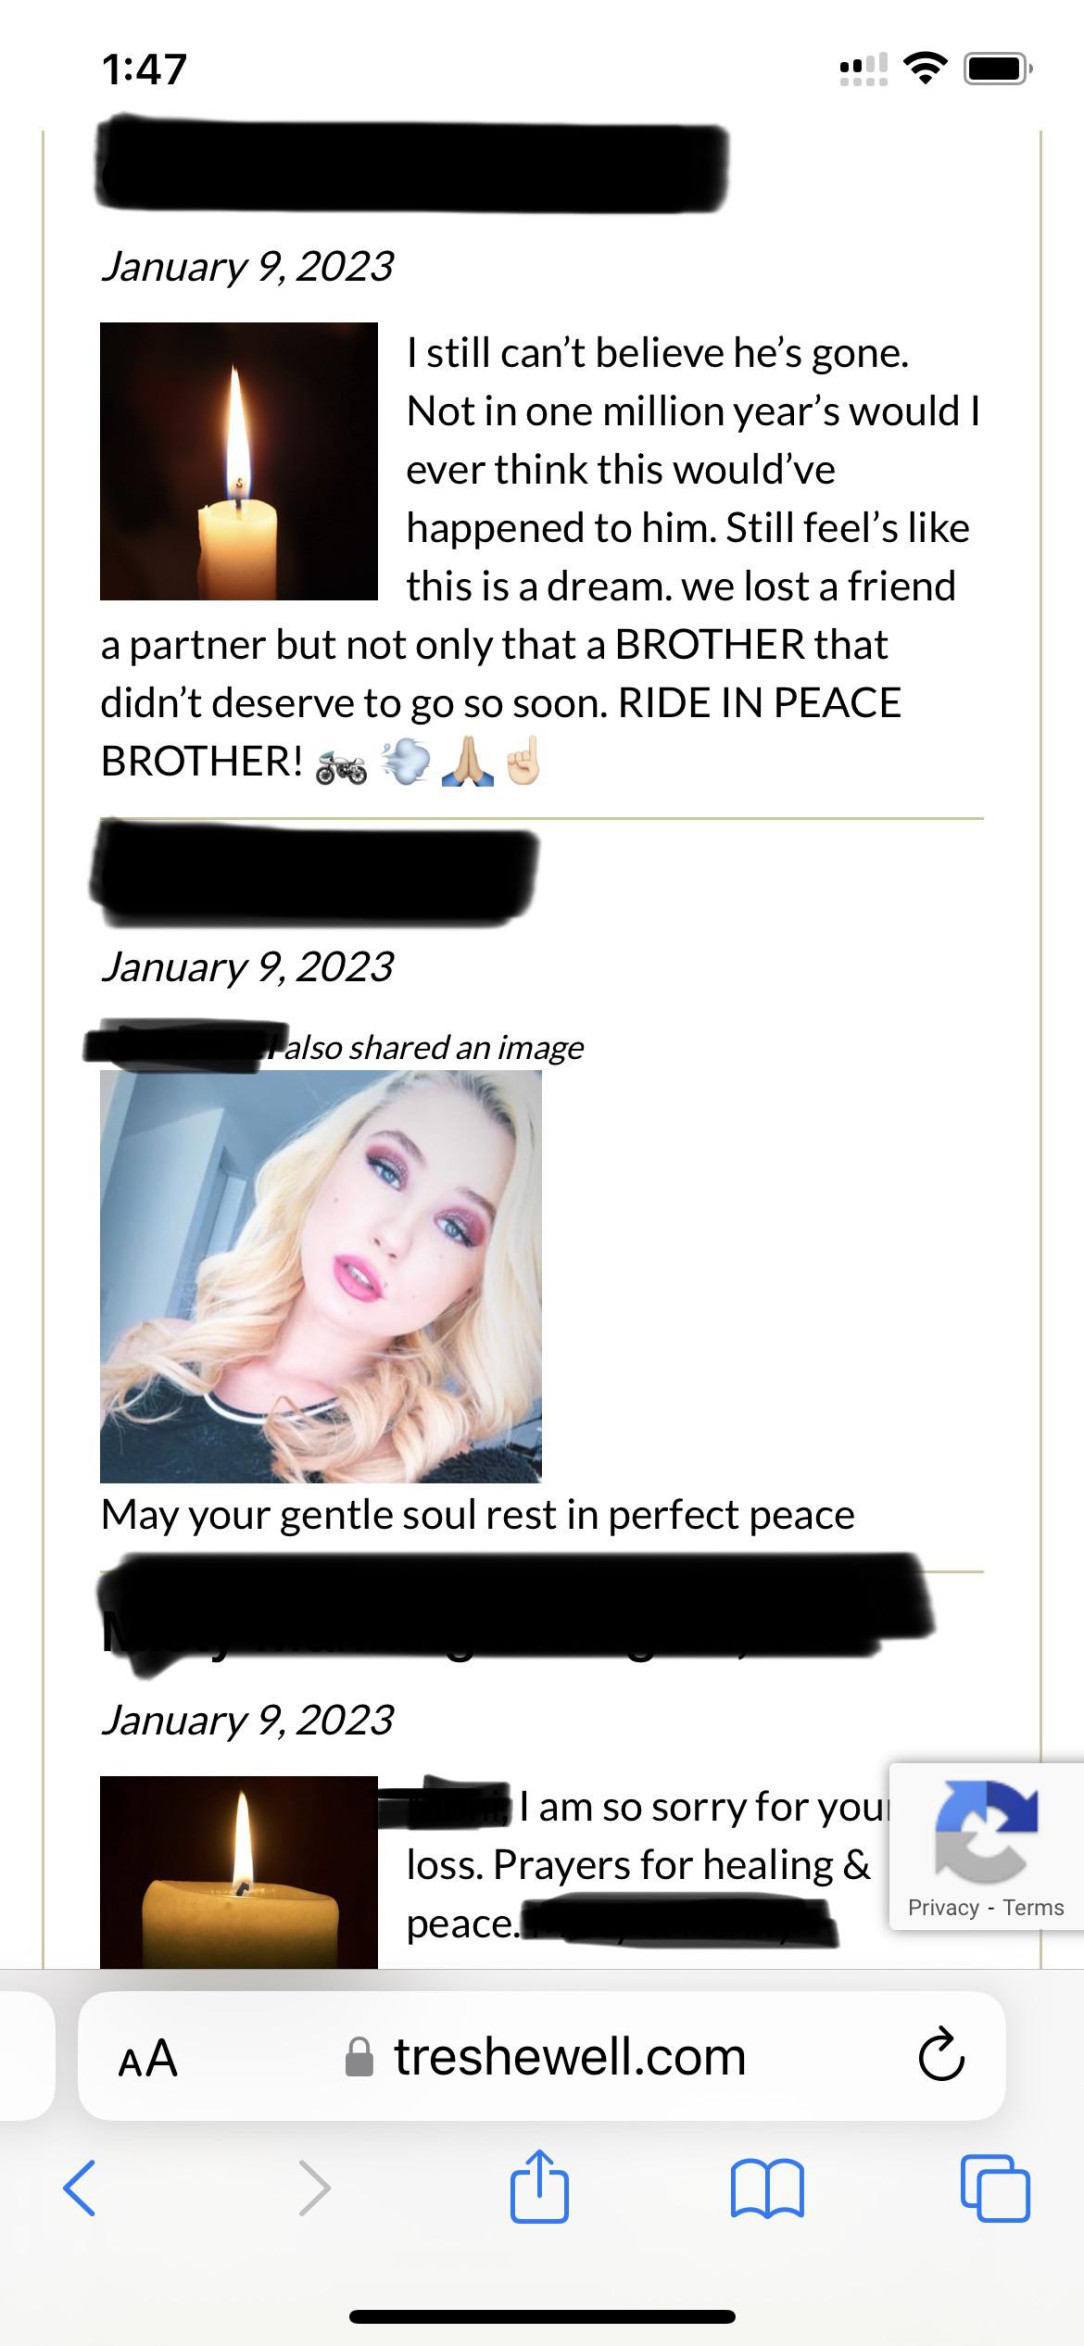 Adding a selfie of herself to a memorial page for someone else